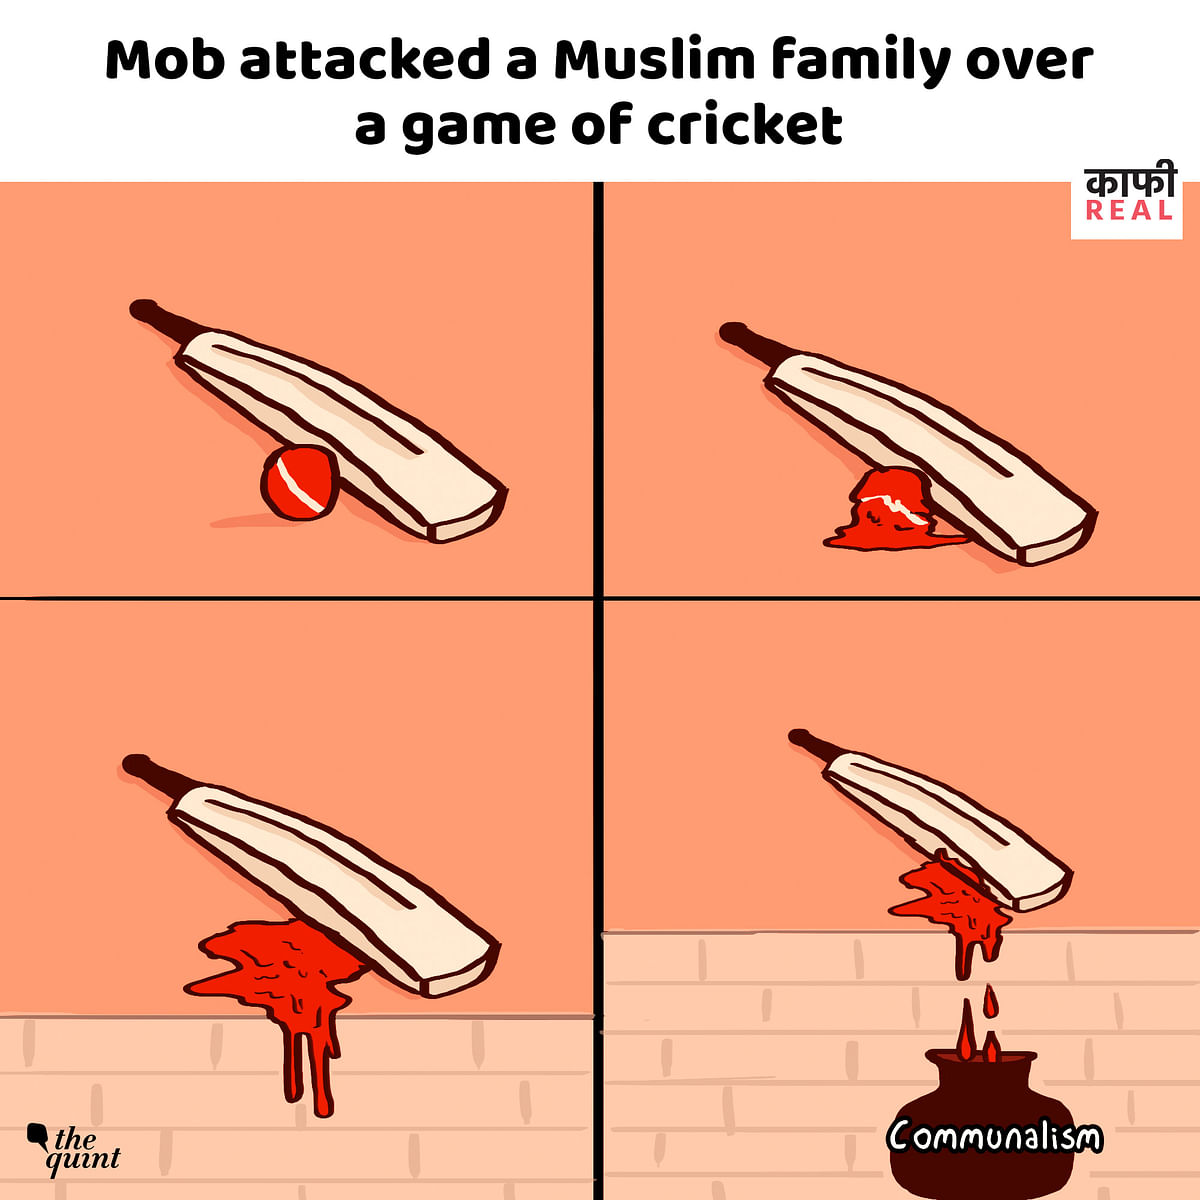 A Muslim family was attacked by a mob who entered their house after a fight broke out over a game of cricket.